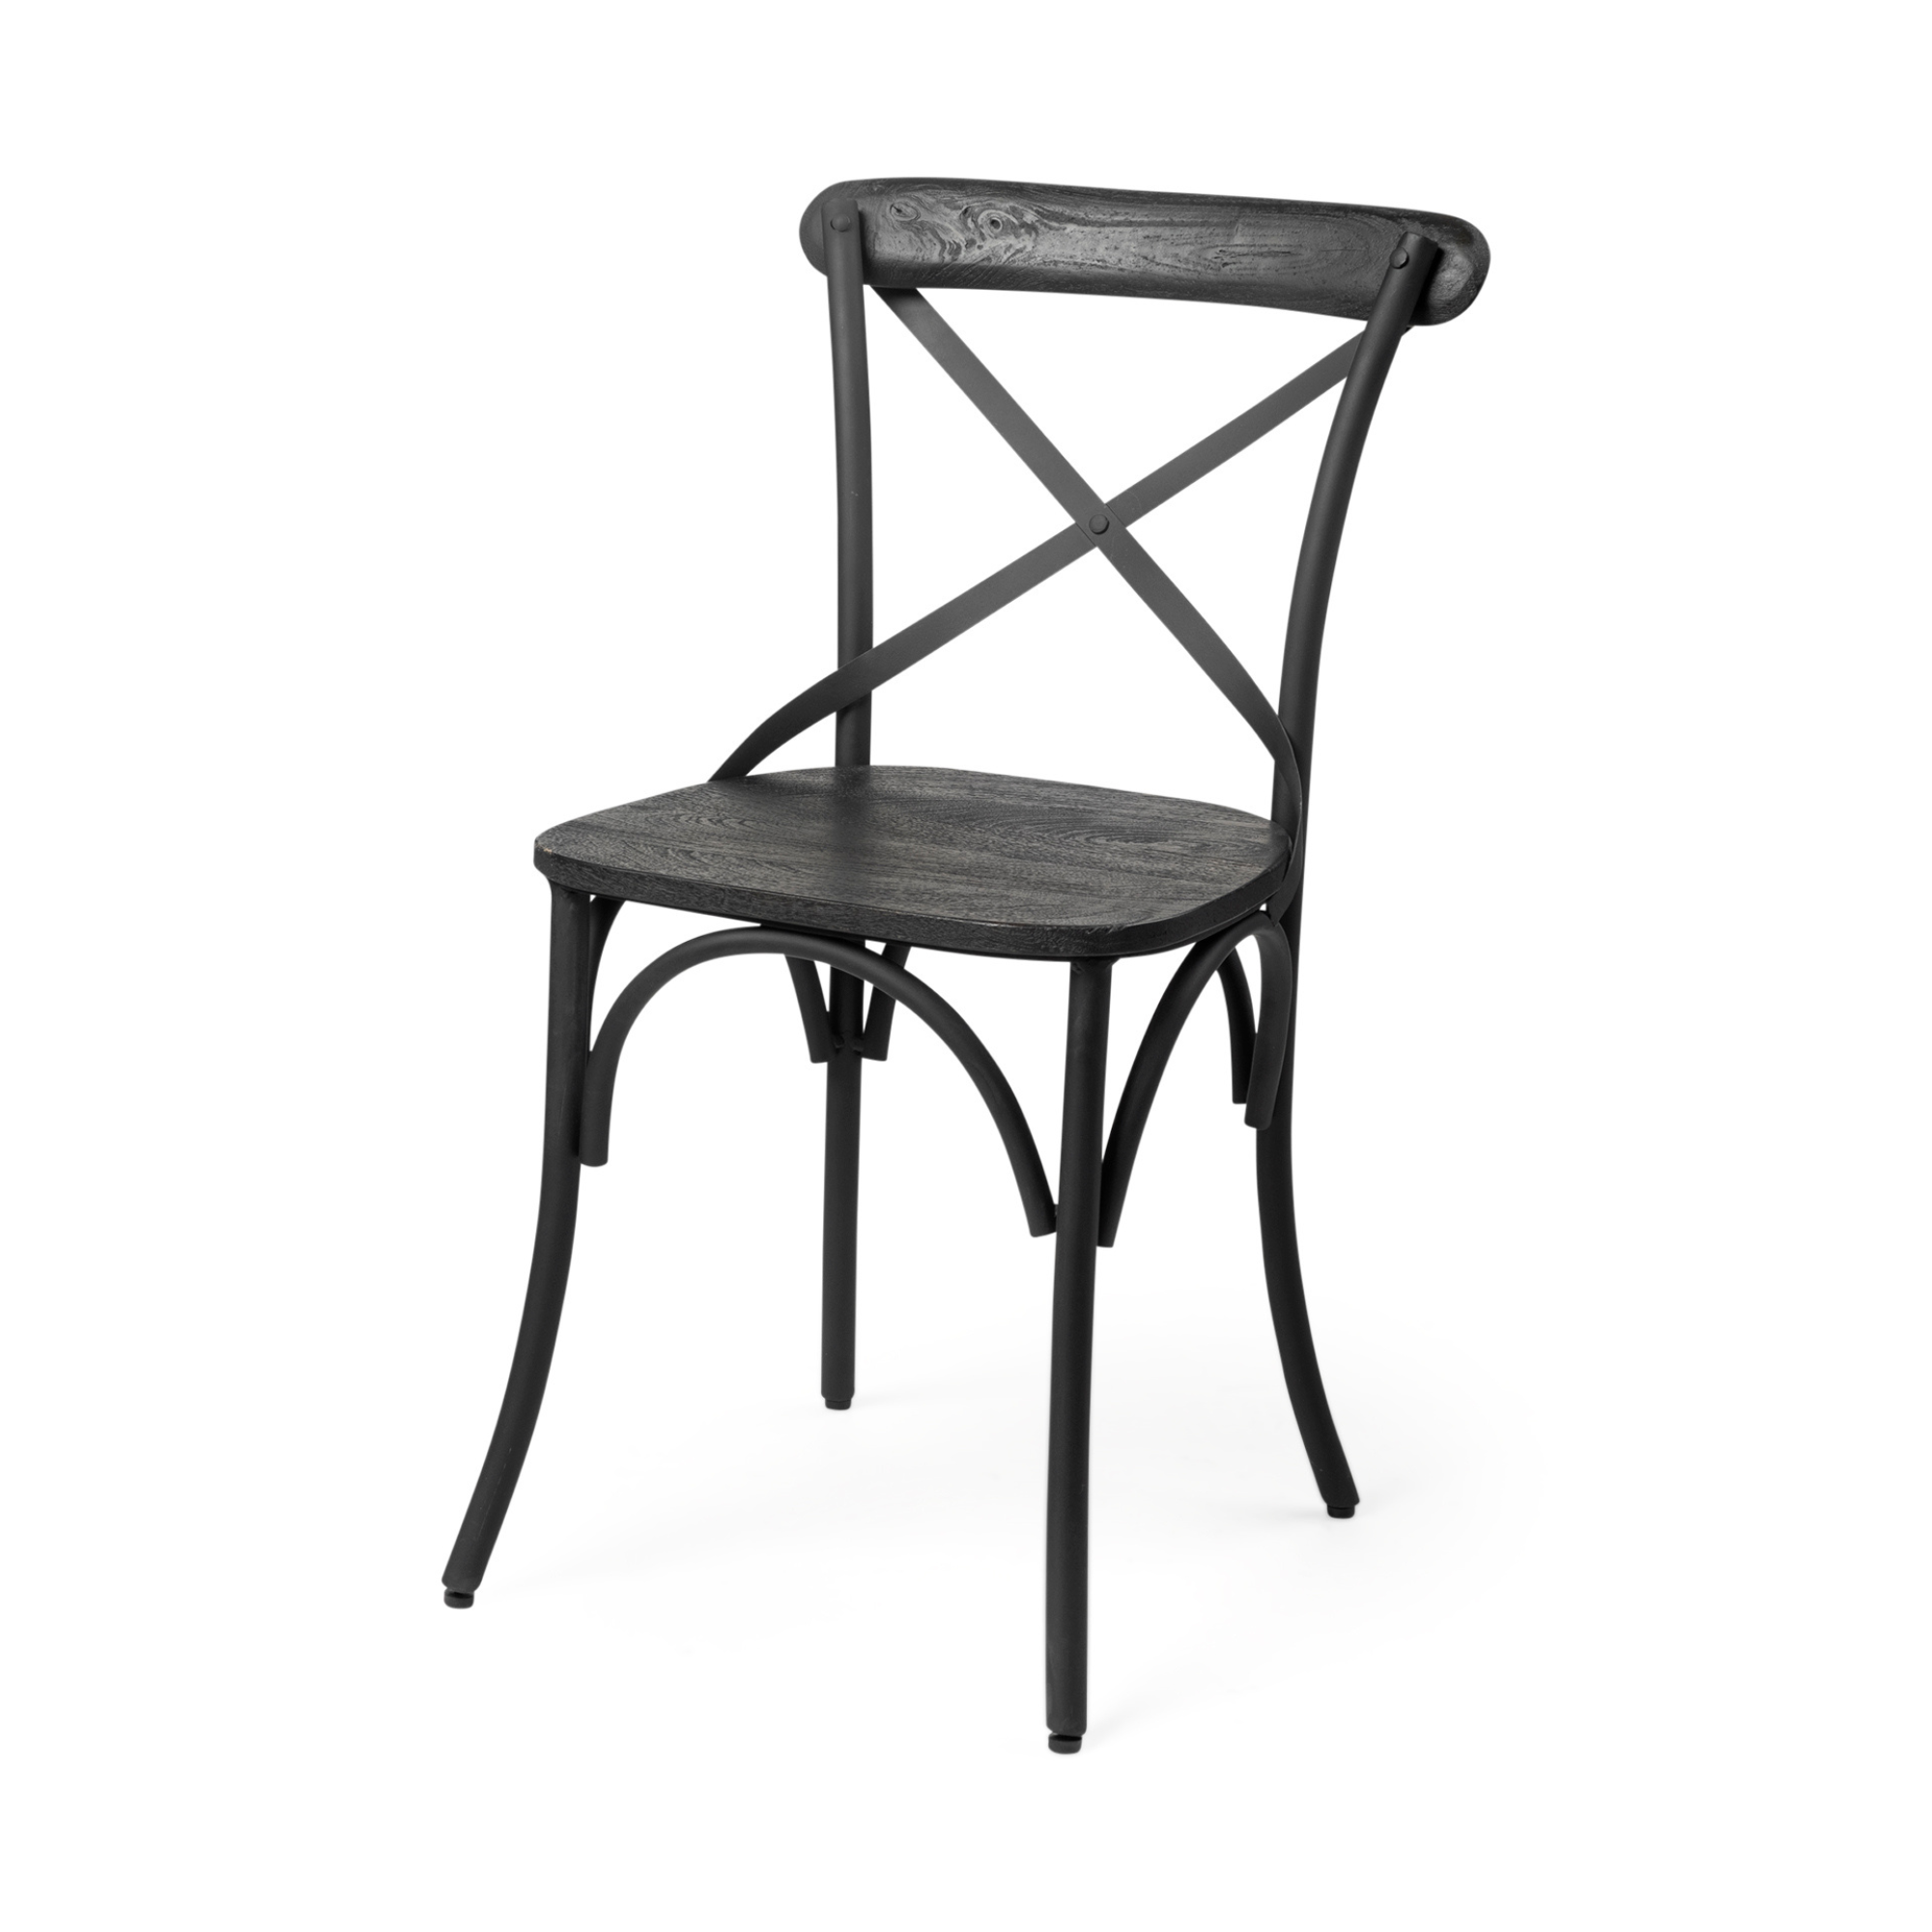 Ethany Dining Chair - Black